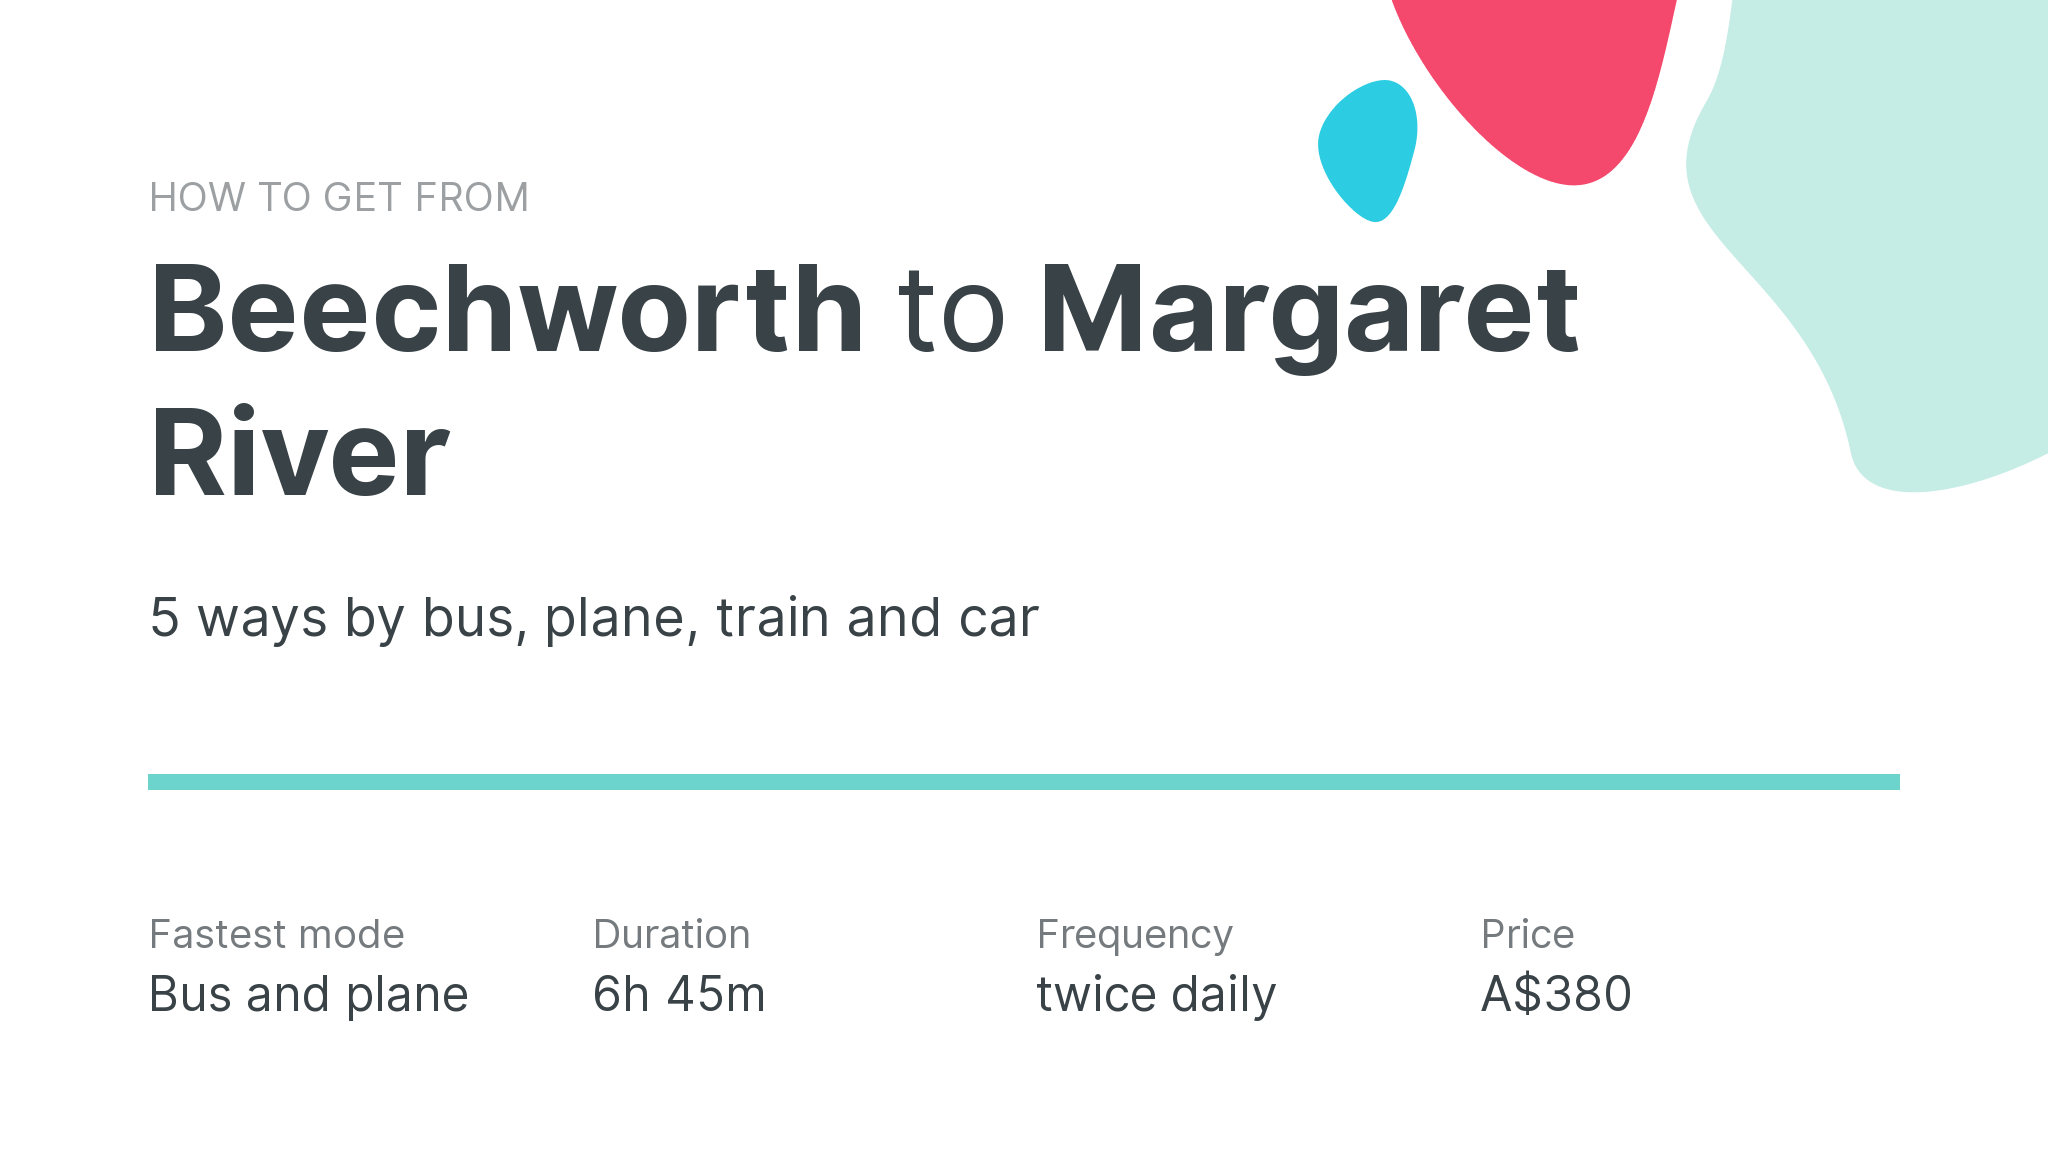 How do I get from Beechworth to Margaret River